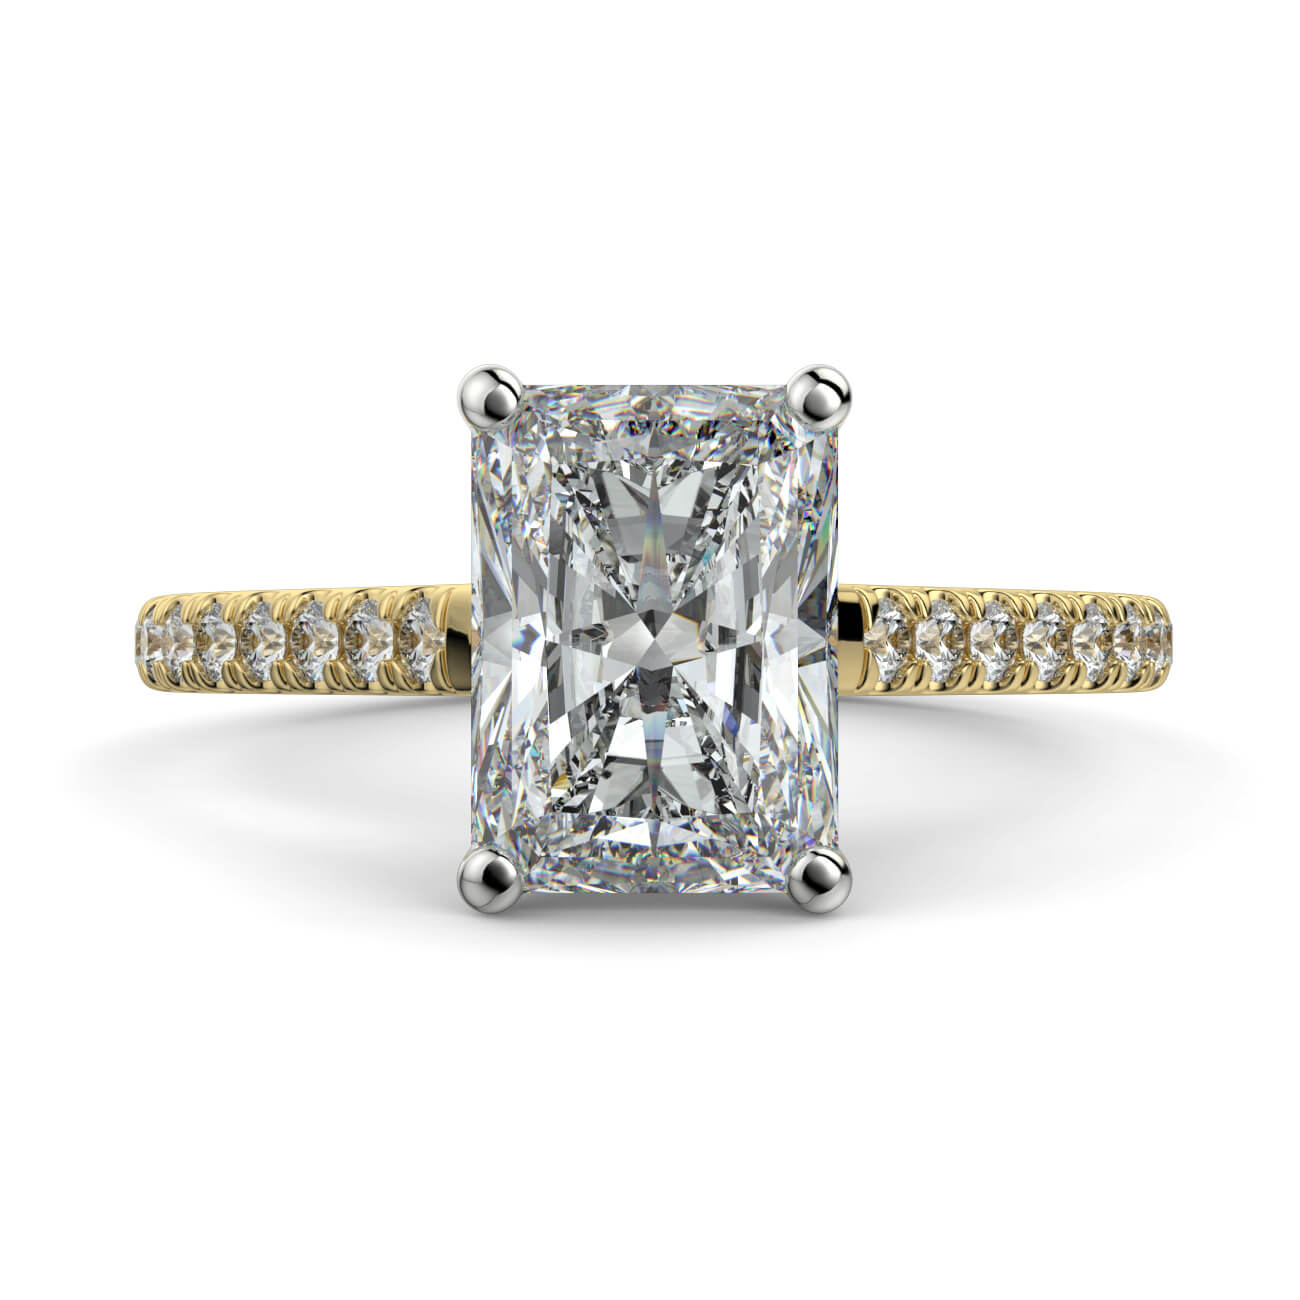 Radiant cut diamond cathedral engagement ring in white and yellow gold – Australian Diamond Network